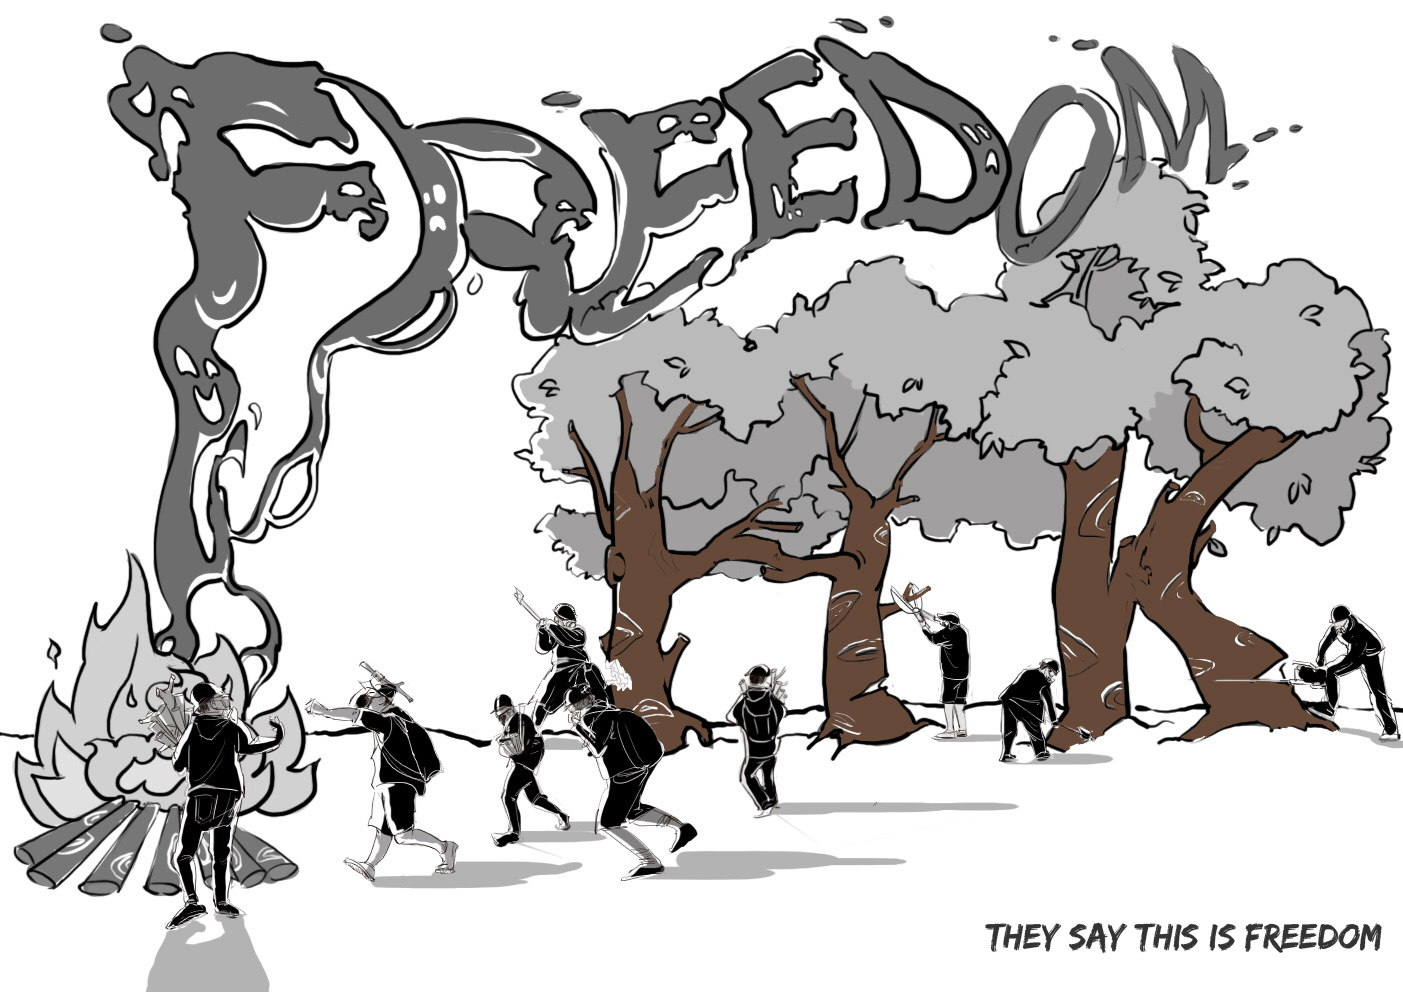 Q101025-漫画海报- They say this is freedom -英文.jpg